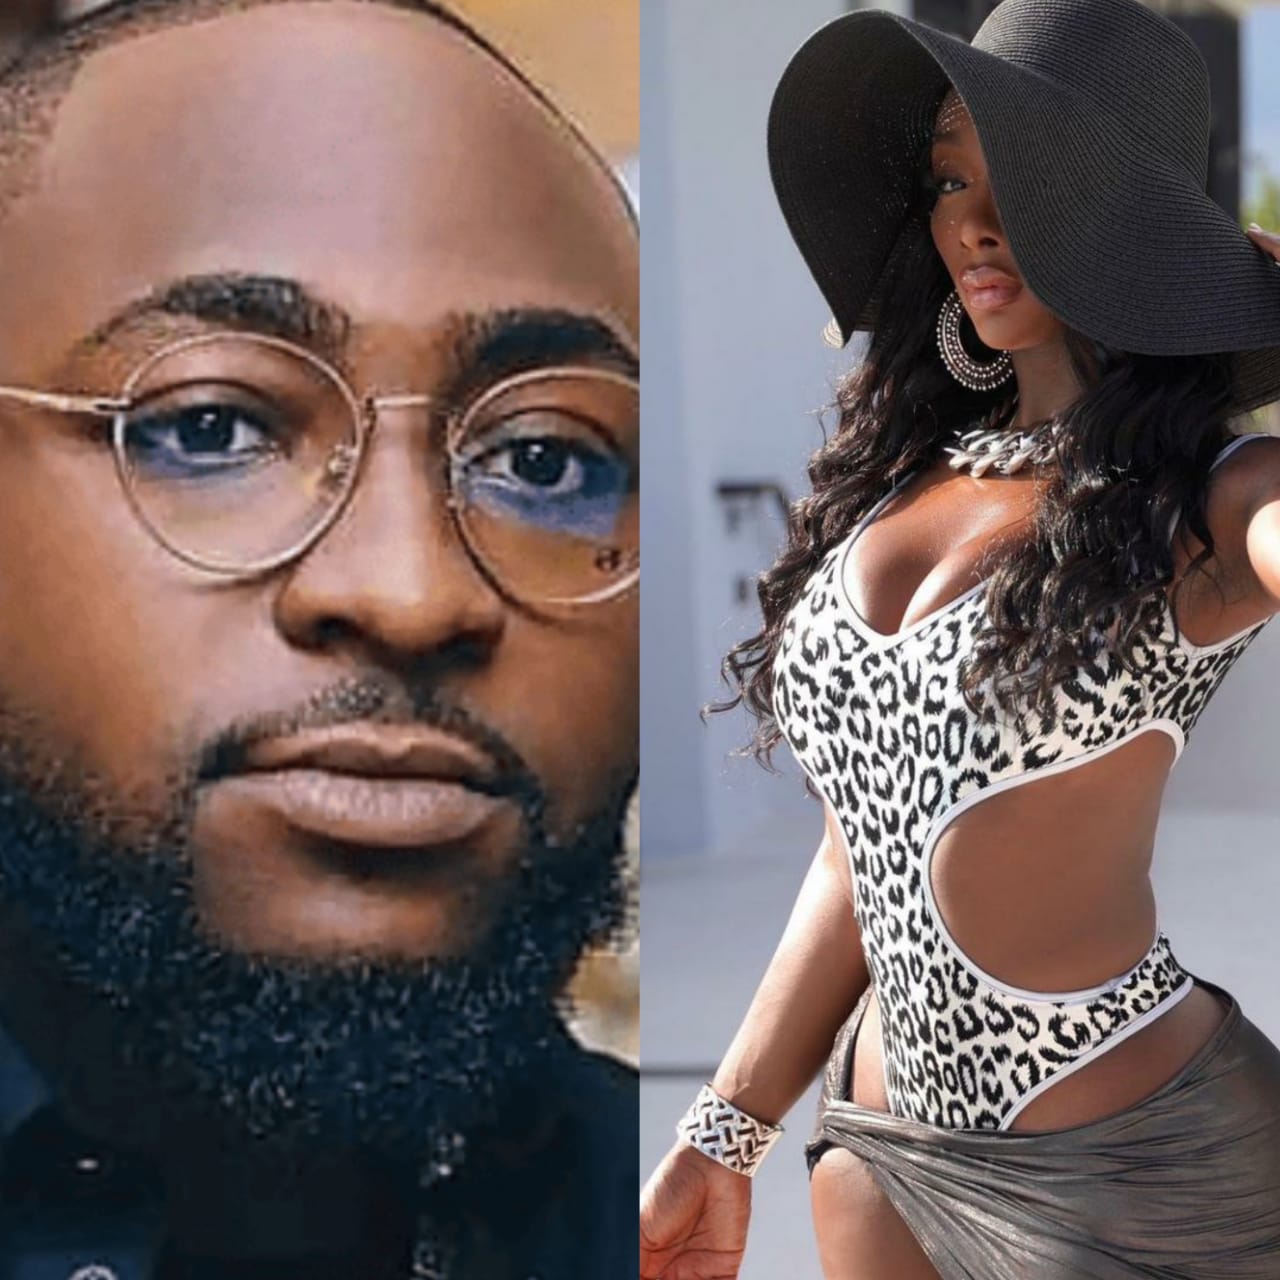 ”ONCE YOU DELIVER THE BABY, WE WILL DO THE NEEDFUL AND TAKE FULL RESPONSIBILITY IF IT IS AN ADELEKE”- LADY CLAIMING TO BE PREGNANT FOR SINGER DAVIDO SHARES SCREENSHOT OF CHATS SHE ALLEGEDLY HAD WITH A CERTAIN ‘CLARK ADELEKE’